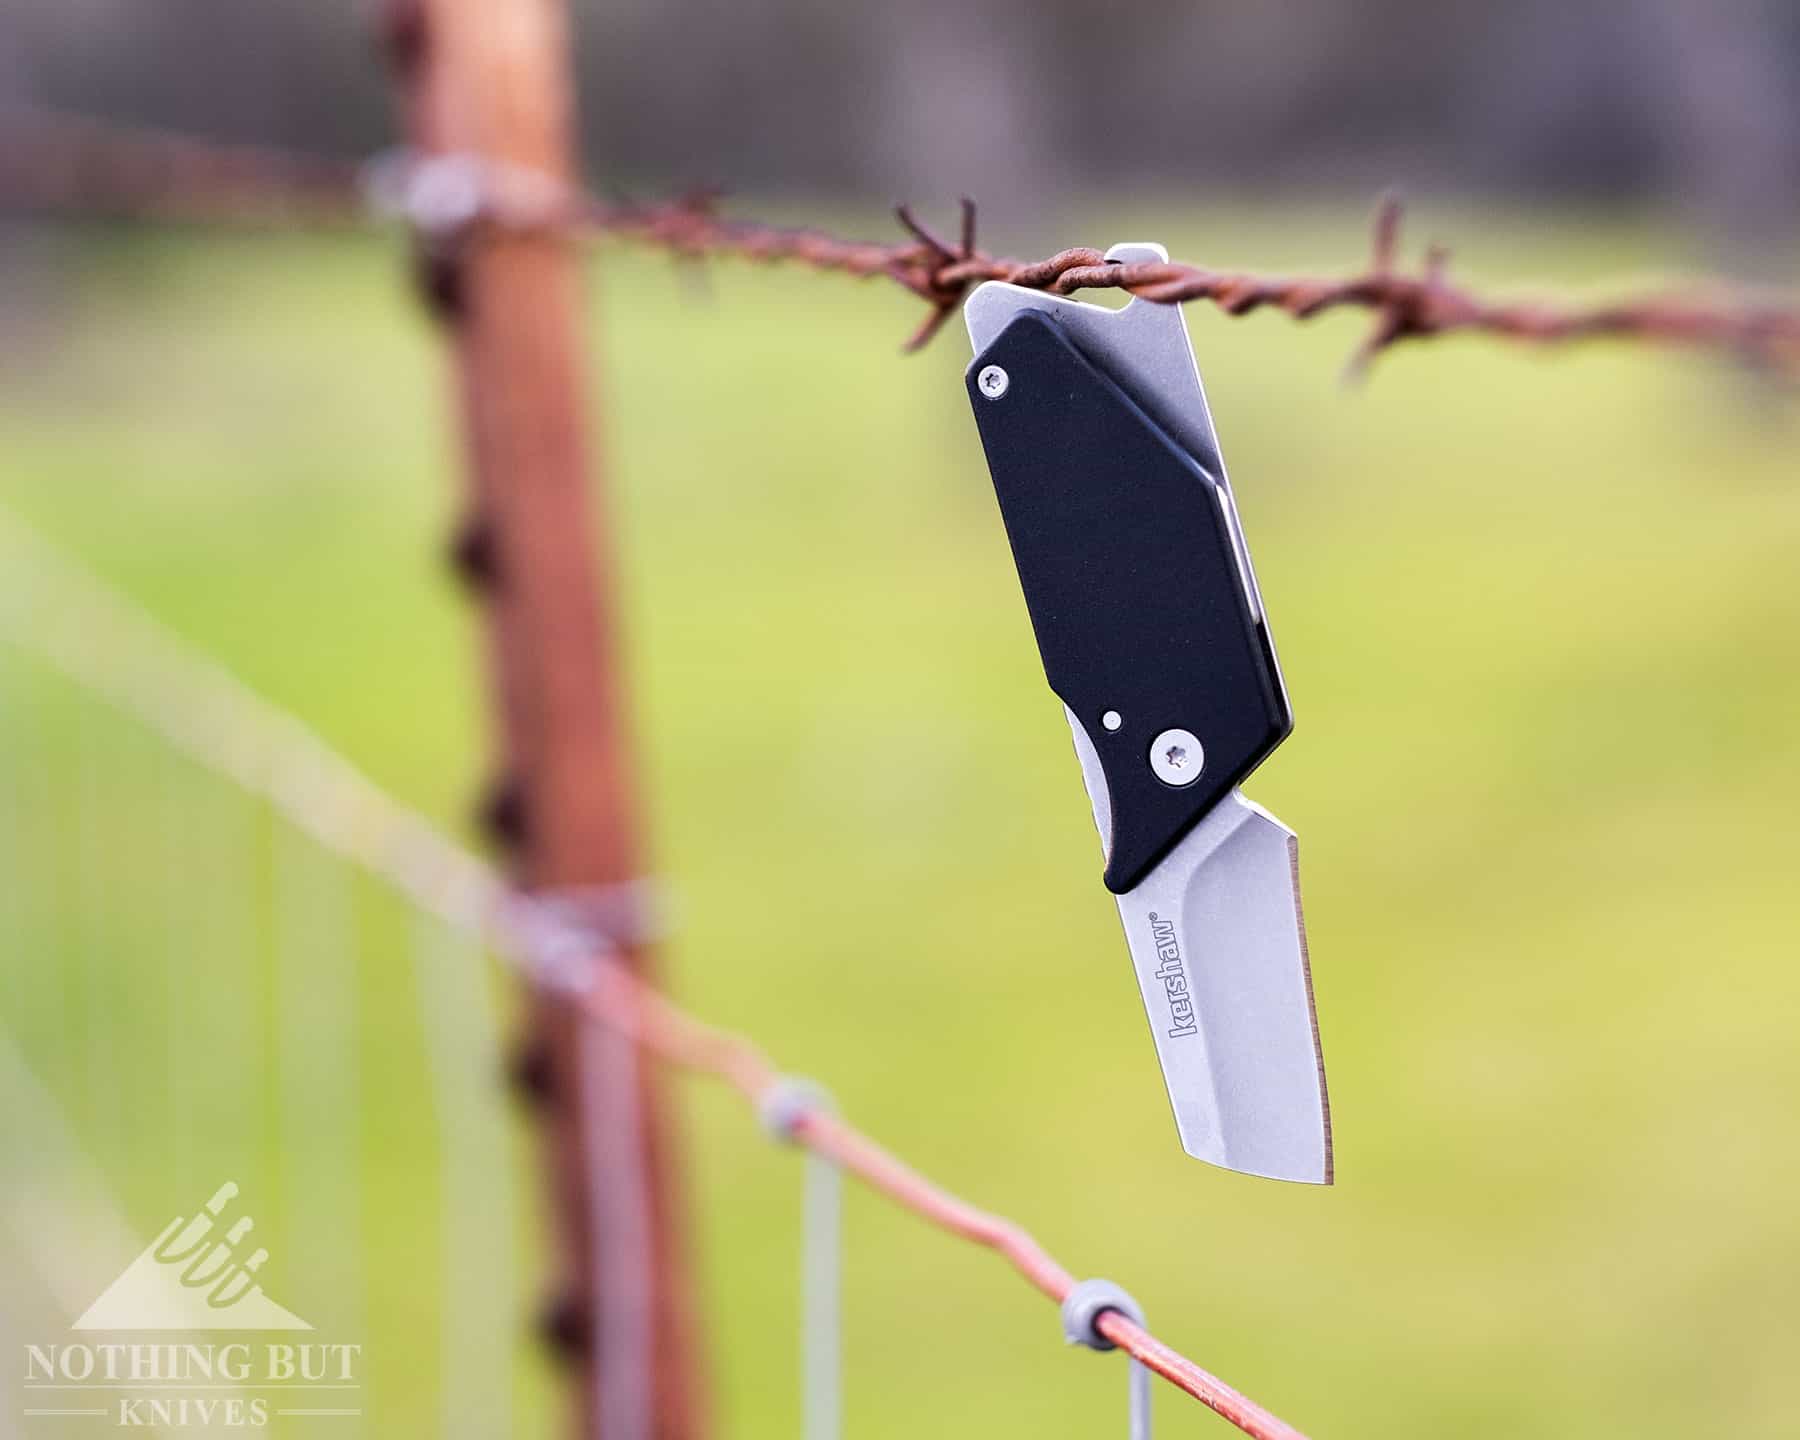 The Kershaw Pub has a bottle opener on the back of the tang. It is shown here hanging from a barbed wire fence. 